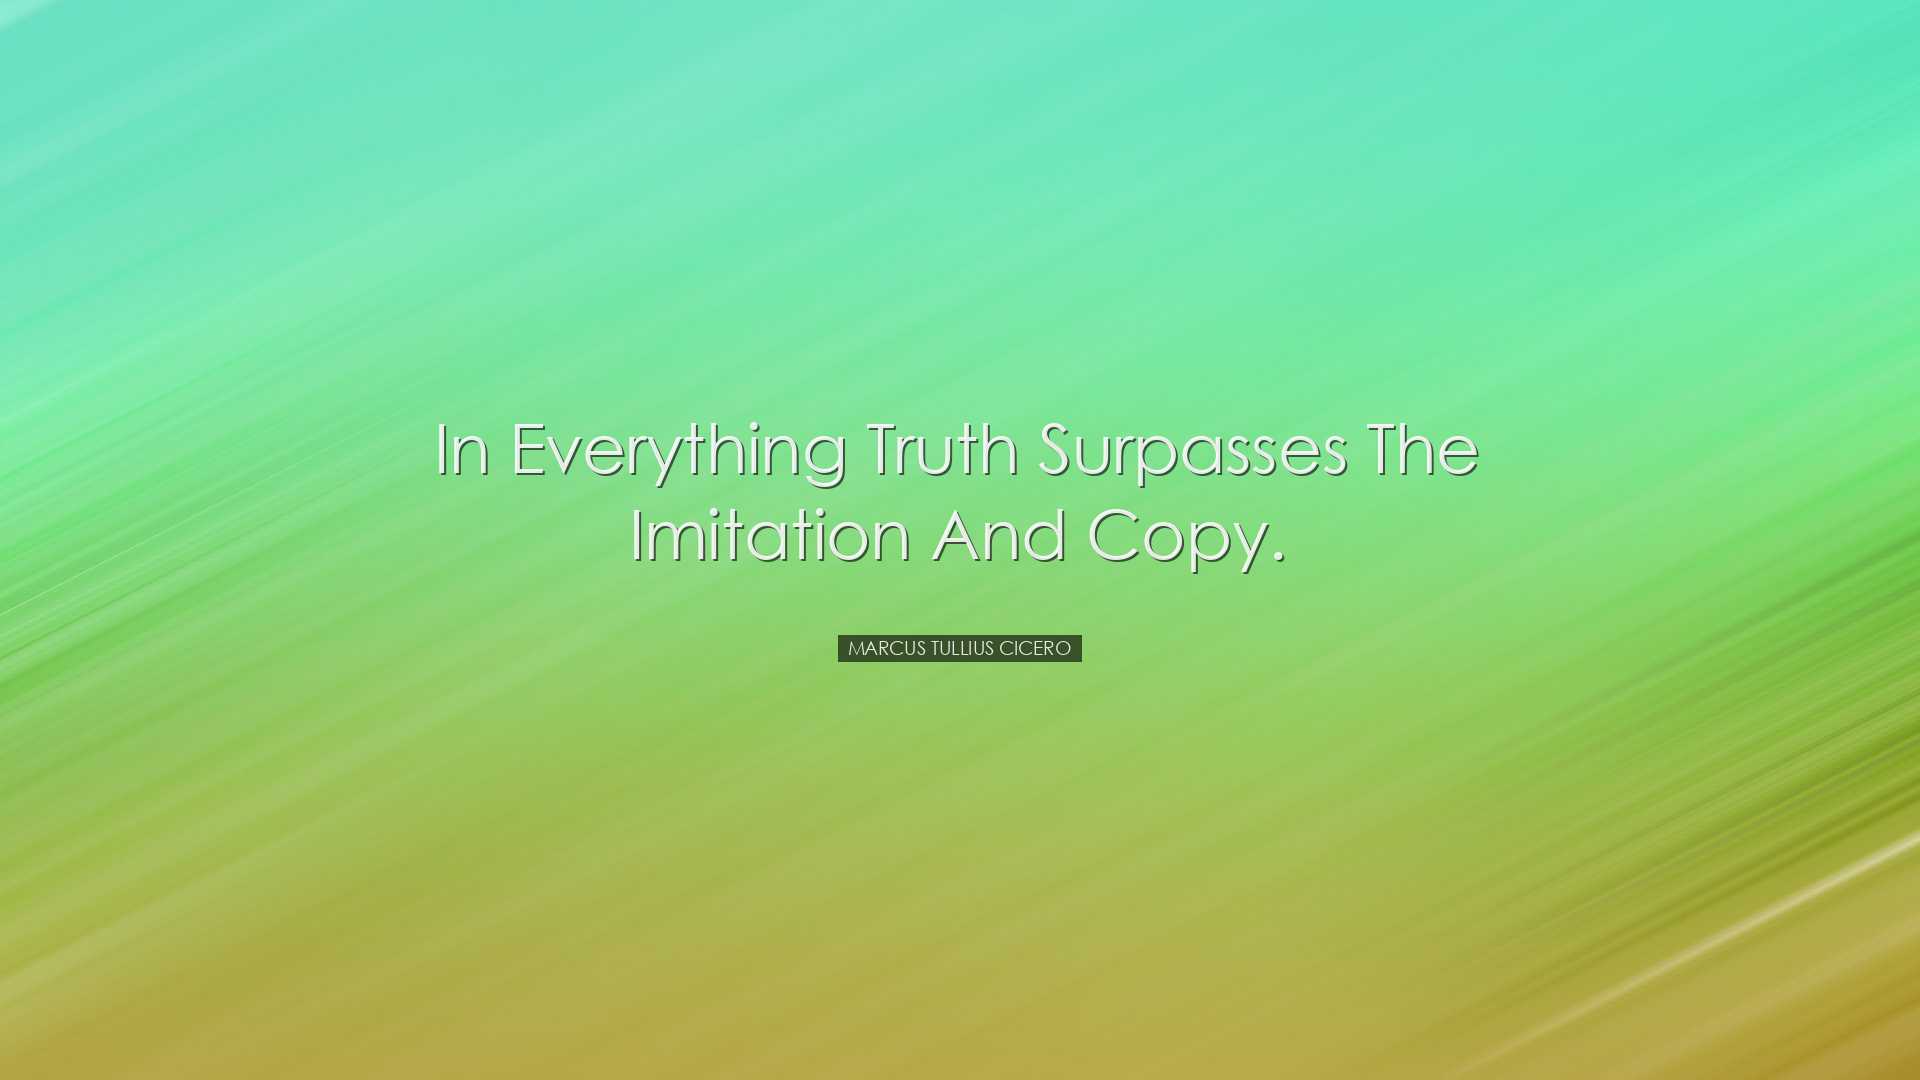 In everything truth surpasses the imitation and copy. - Marcus Tul